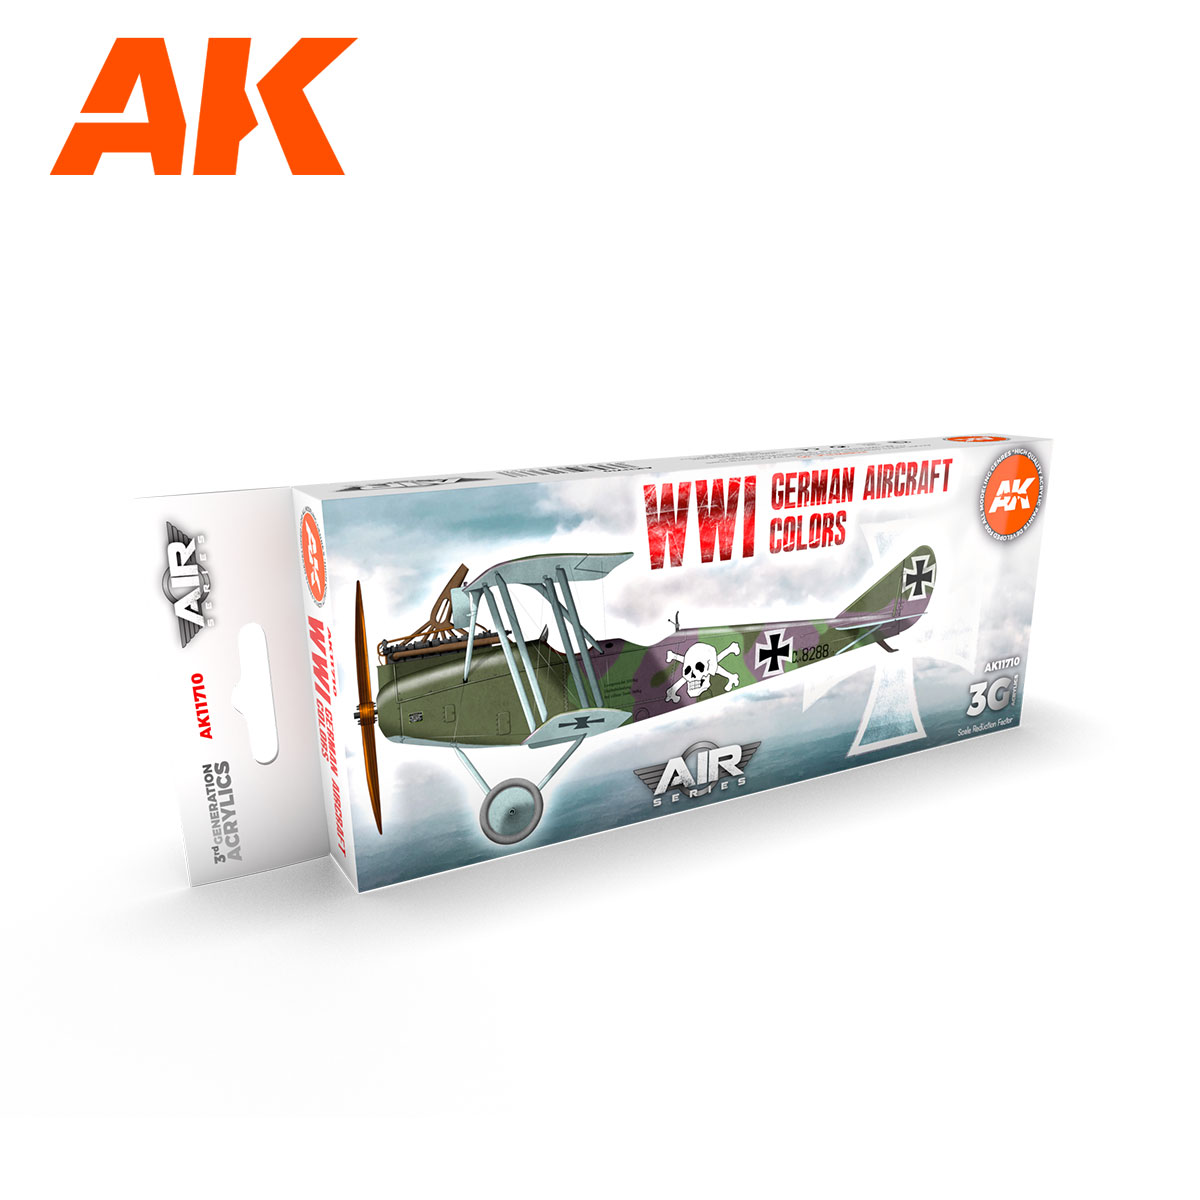 Buy WWI German Aircraft Colors online for22,00€